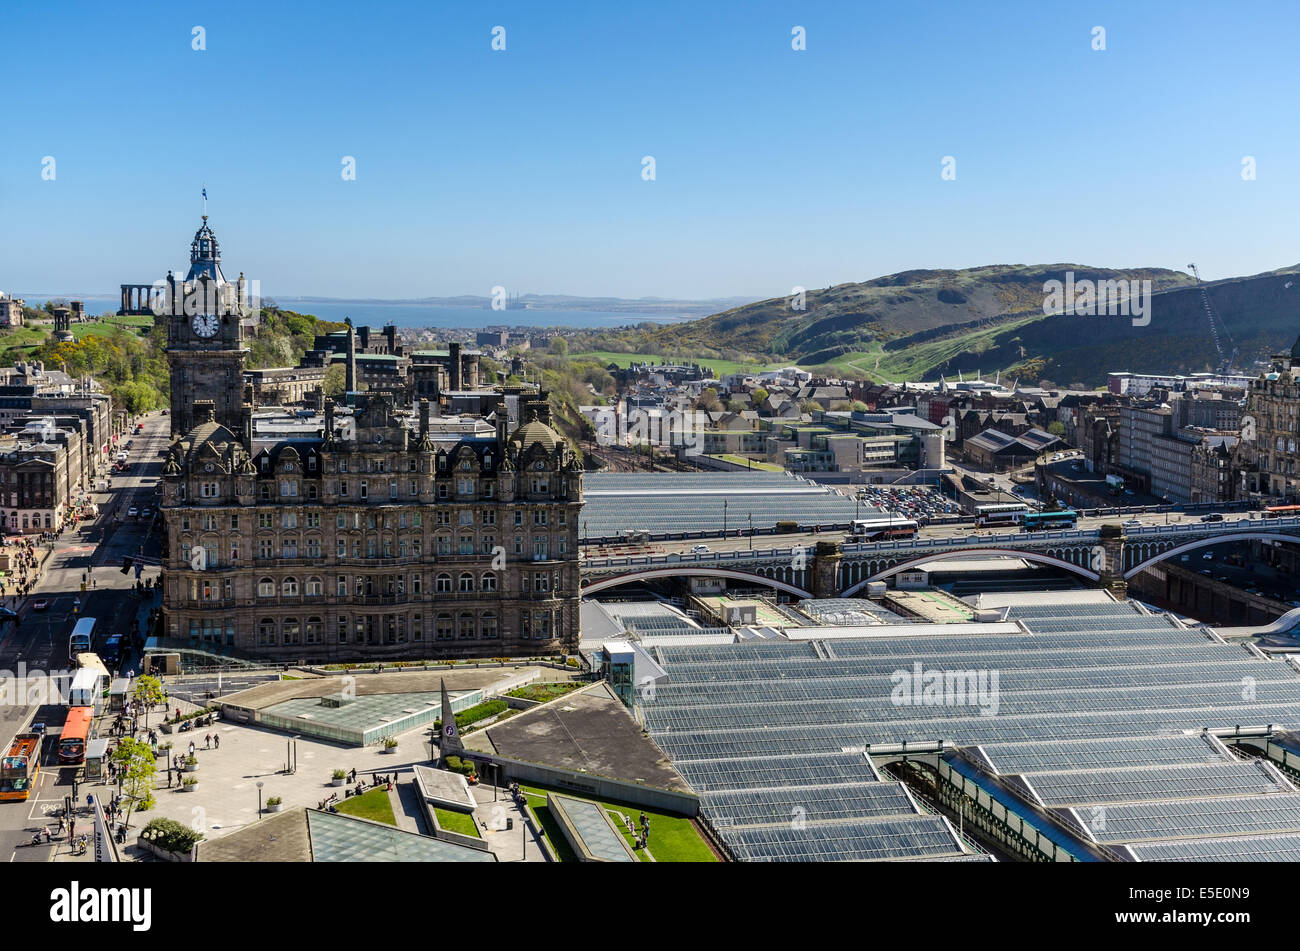 Looking East across Edinburgh to the Balmoral Hotel, Waverley Railway Station, North Bridge, Old Town and Holyrood Park. Stock Photo